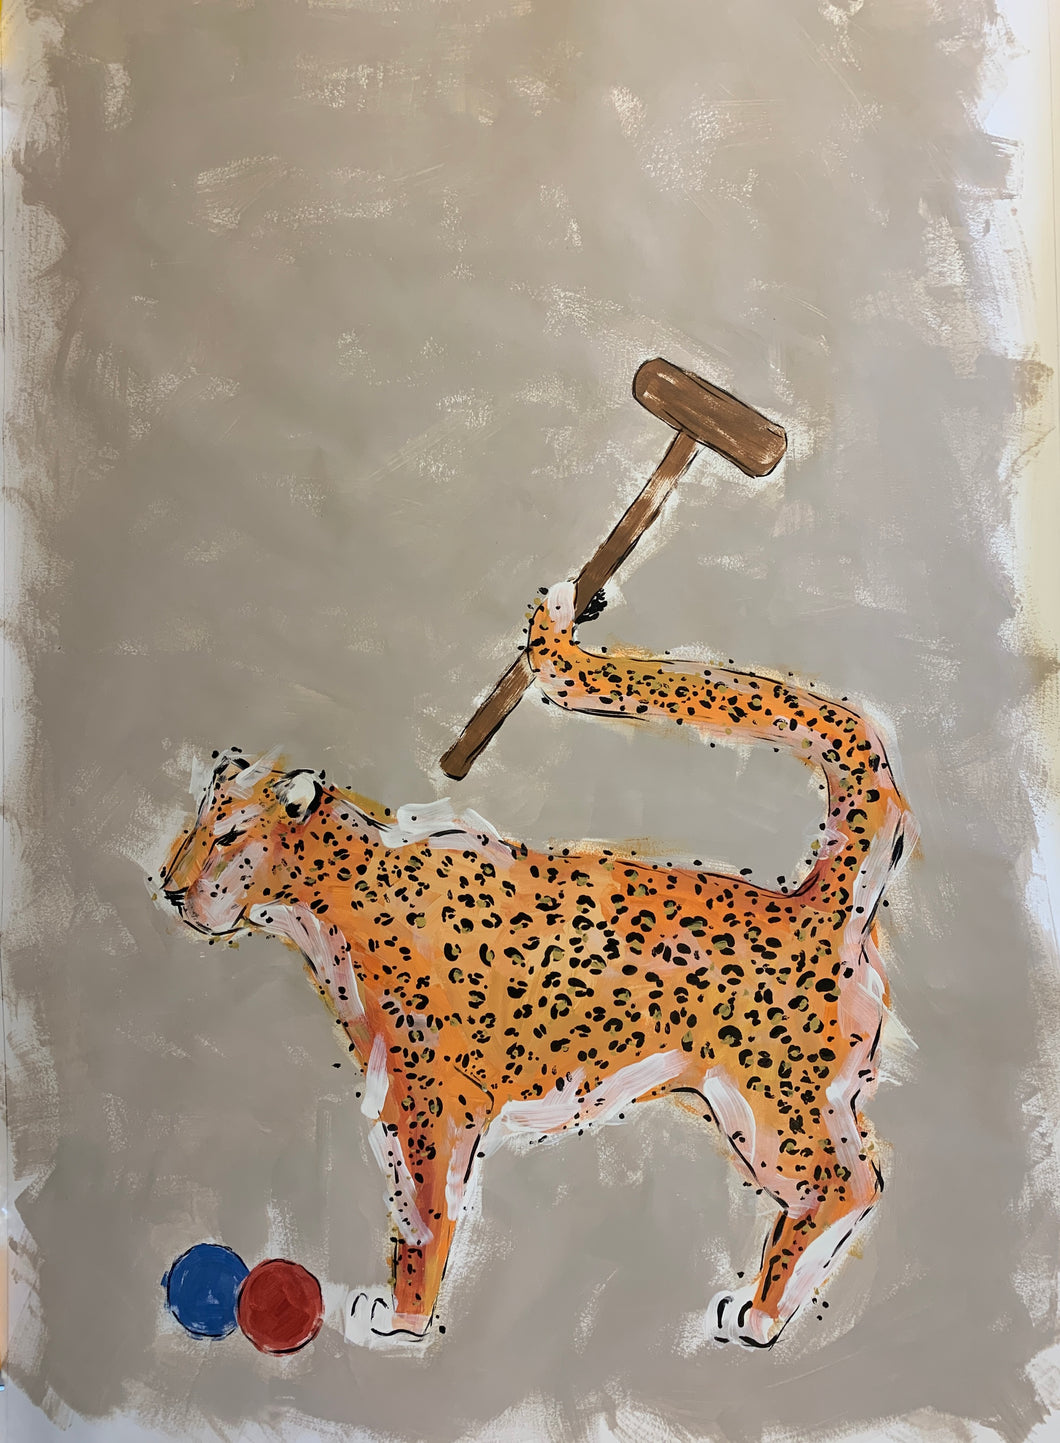 Leopard Playing Croquet- Signed Print